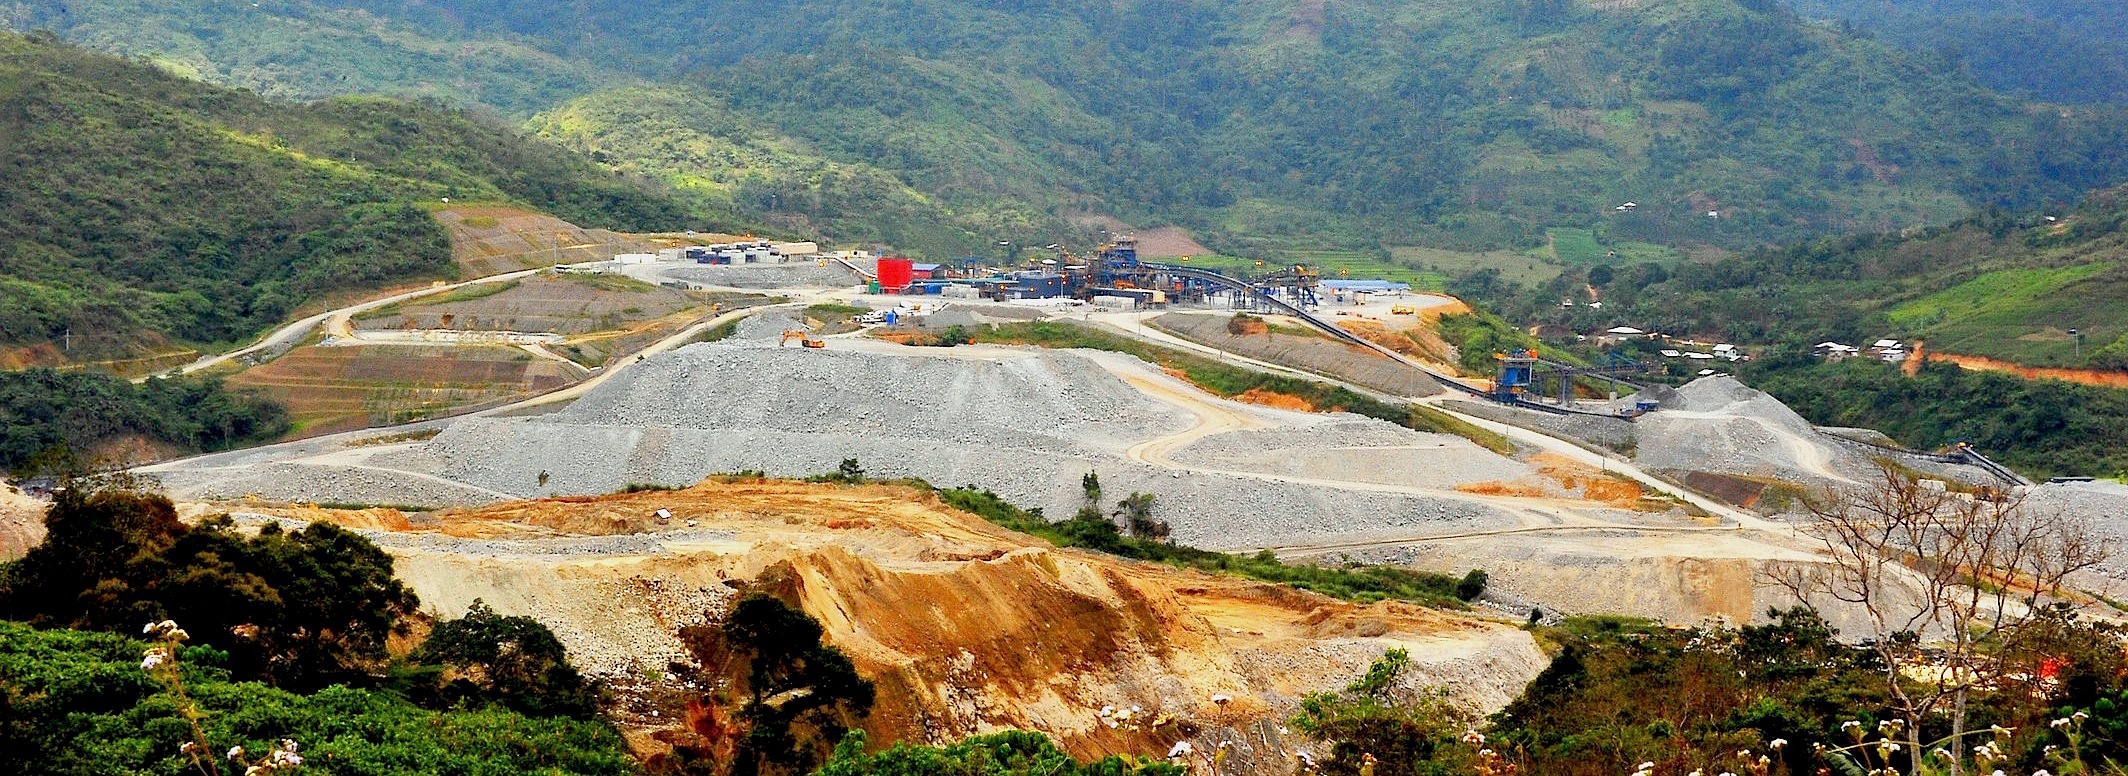 OceanaGold’s Didipio mine produces high grade gold and copper on the island of Luzon in the Philippines. The Department of Environment and Natural Resources suspended the mine's operating license on February 8, 2017. Photo courtesy of Creative Commons